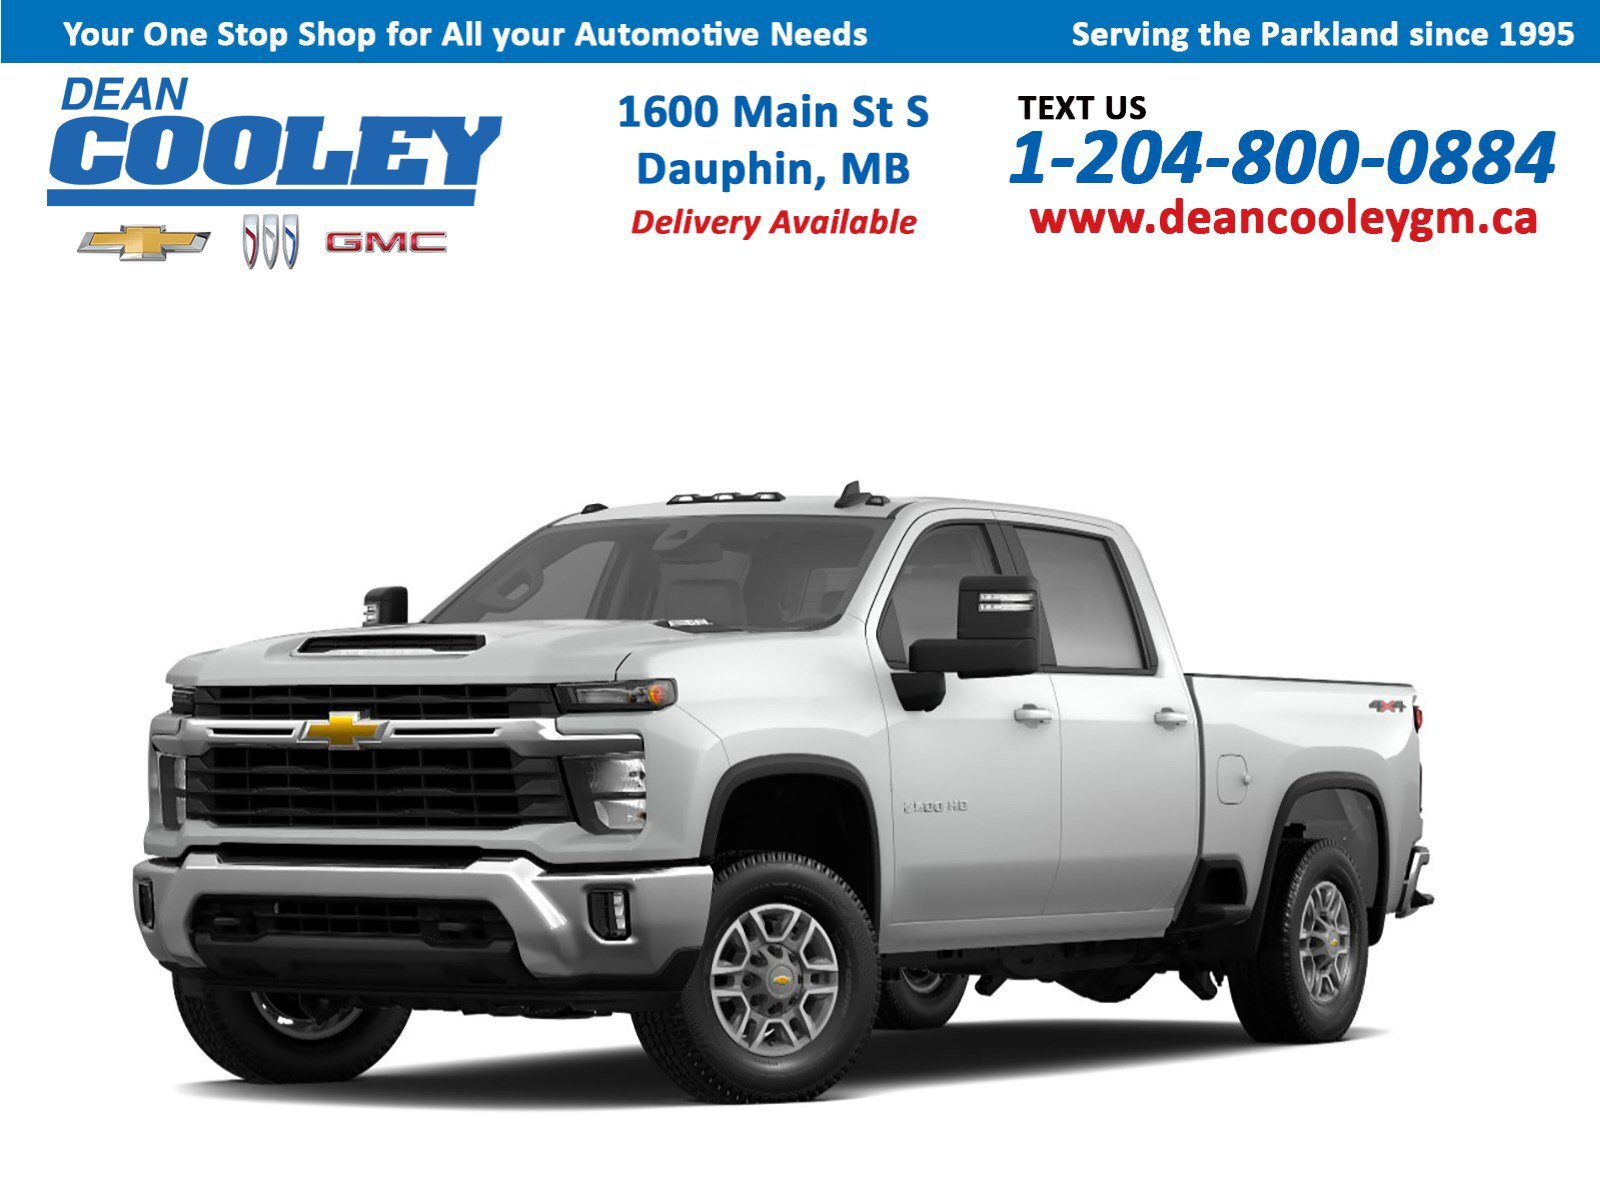 2024 Chevrolet SILVERADO 2500HD Includes Floor Liners, Mudflaps, and Running Board